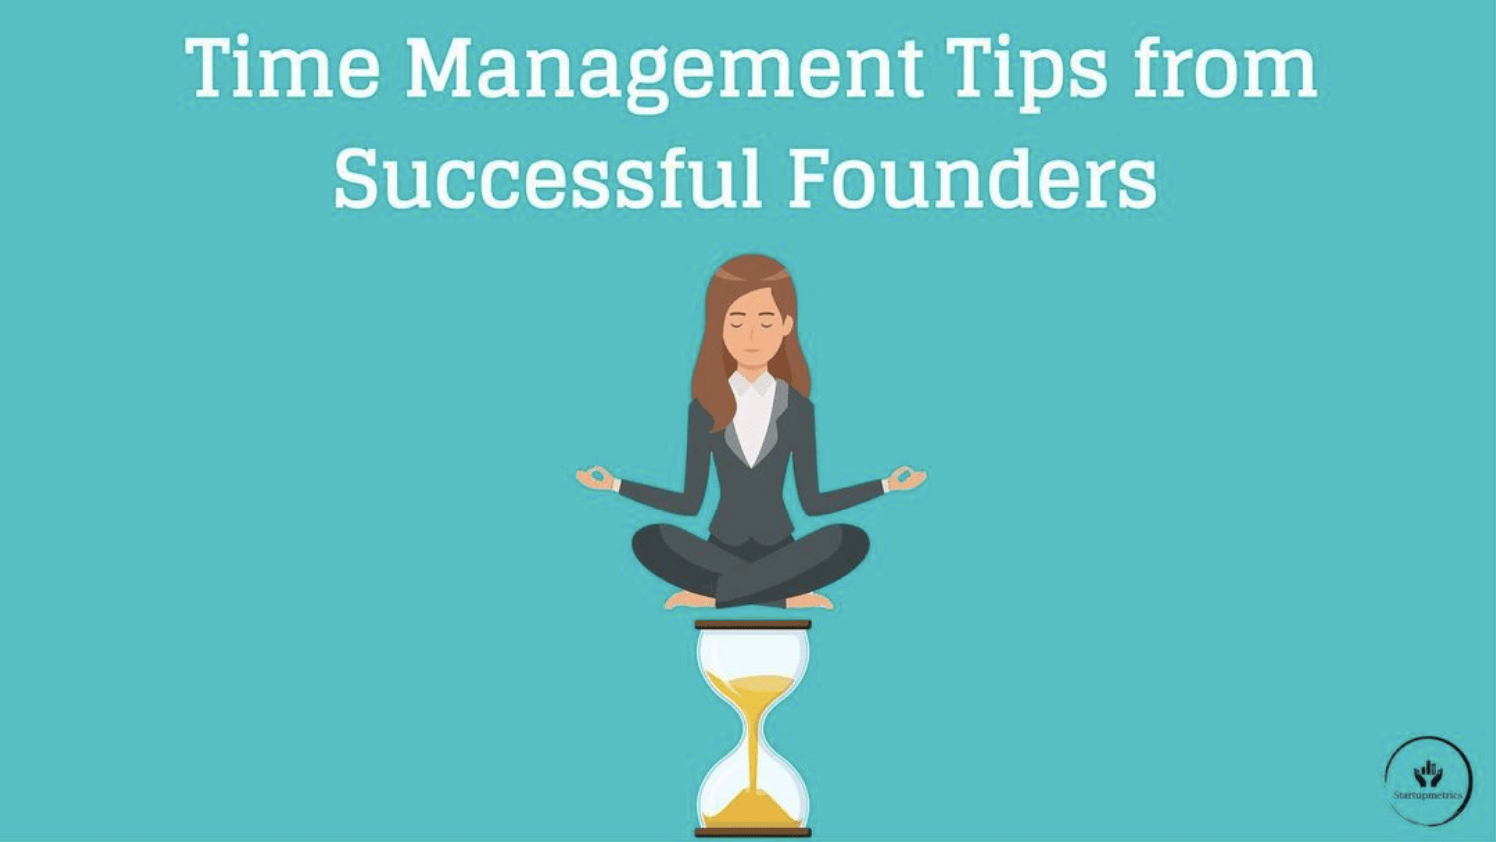 Time management tips from successful founders